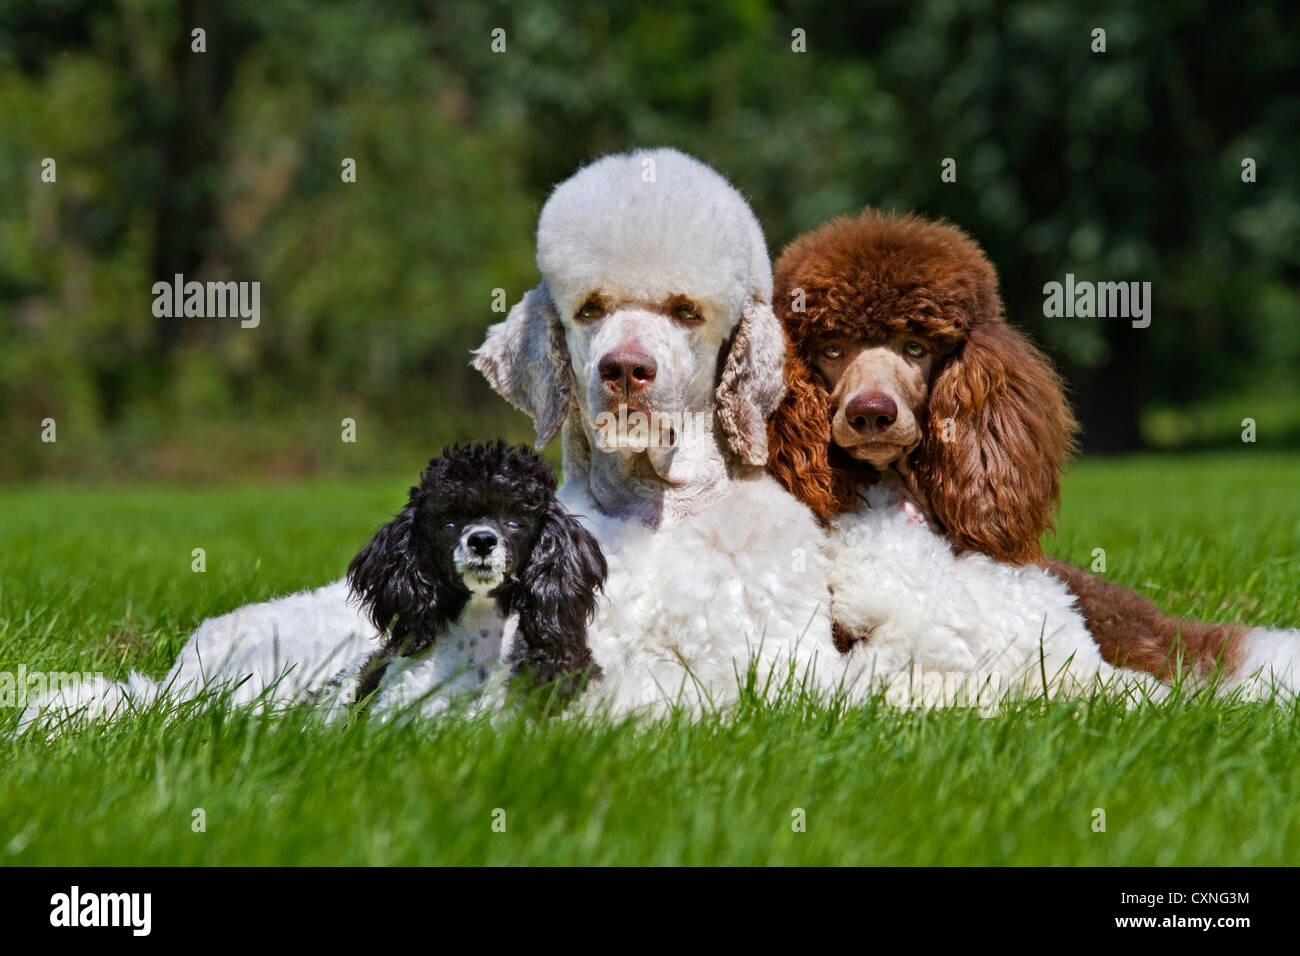 Harlequin and standard poodles (Canis lupus familiaris) in garden Stock Photo